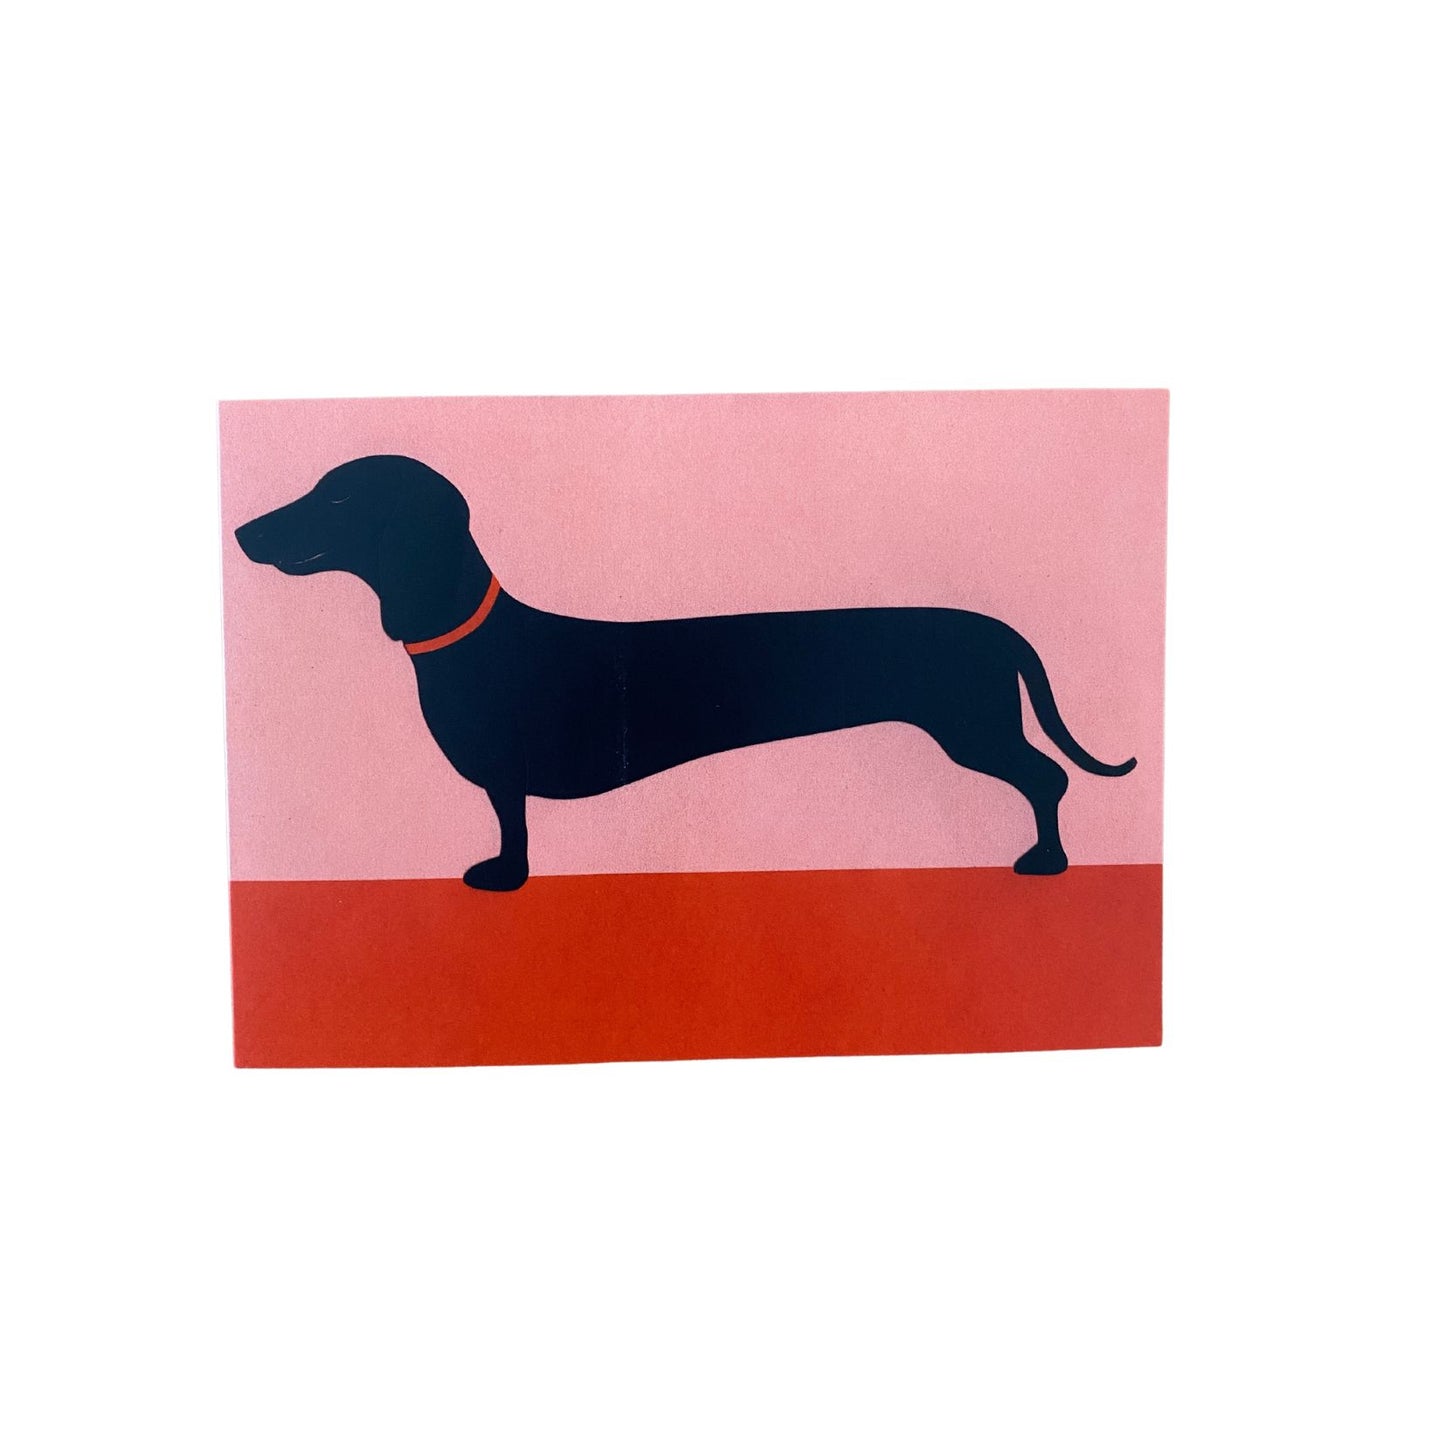 Sausage Dog by Rosi Feist